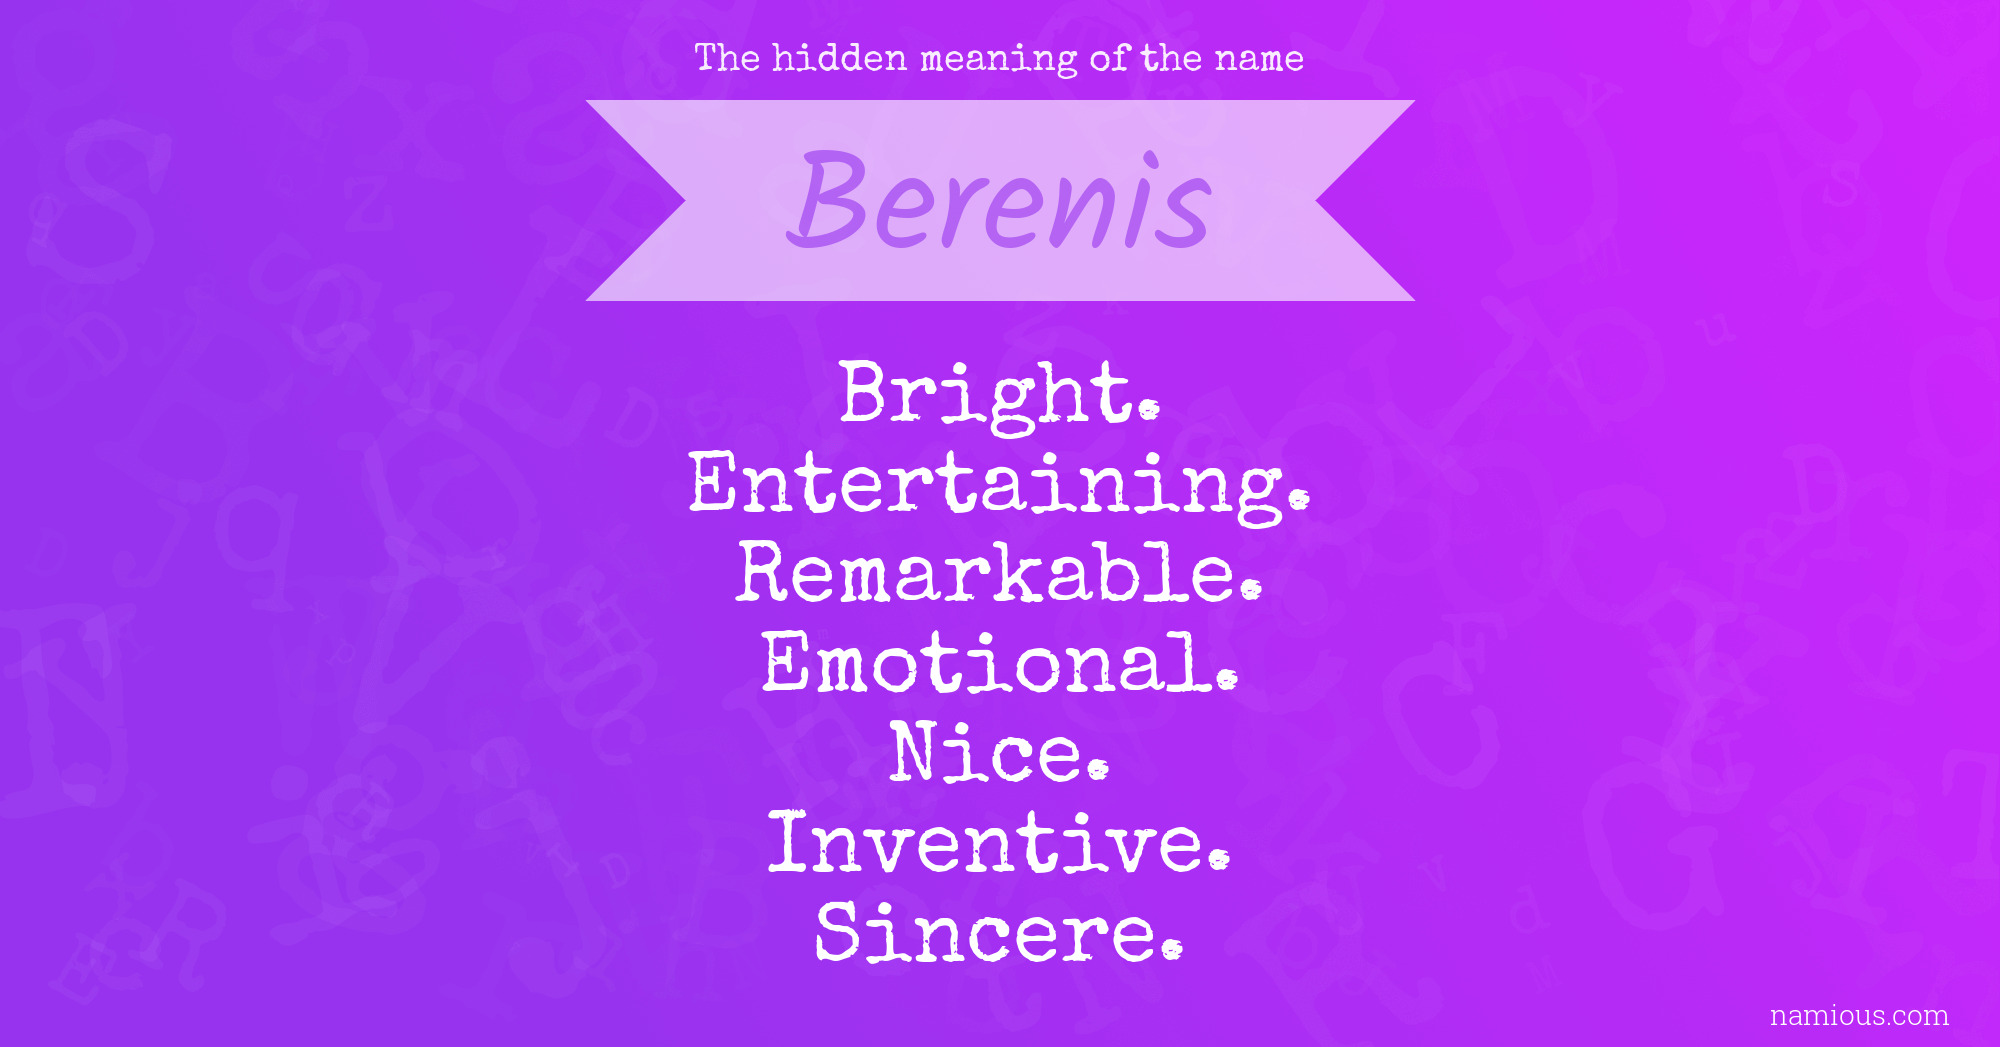 The hidden meaning of the name Berenis